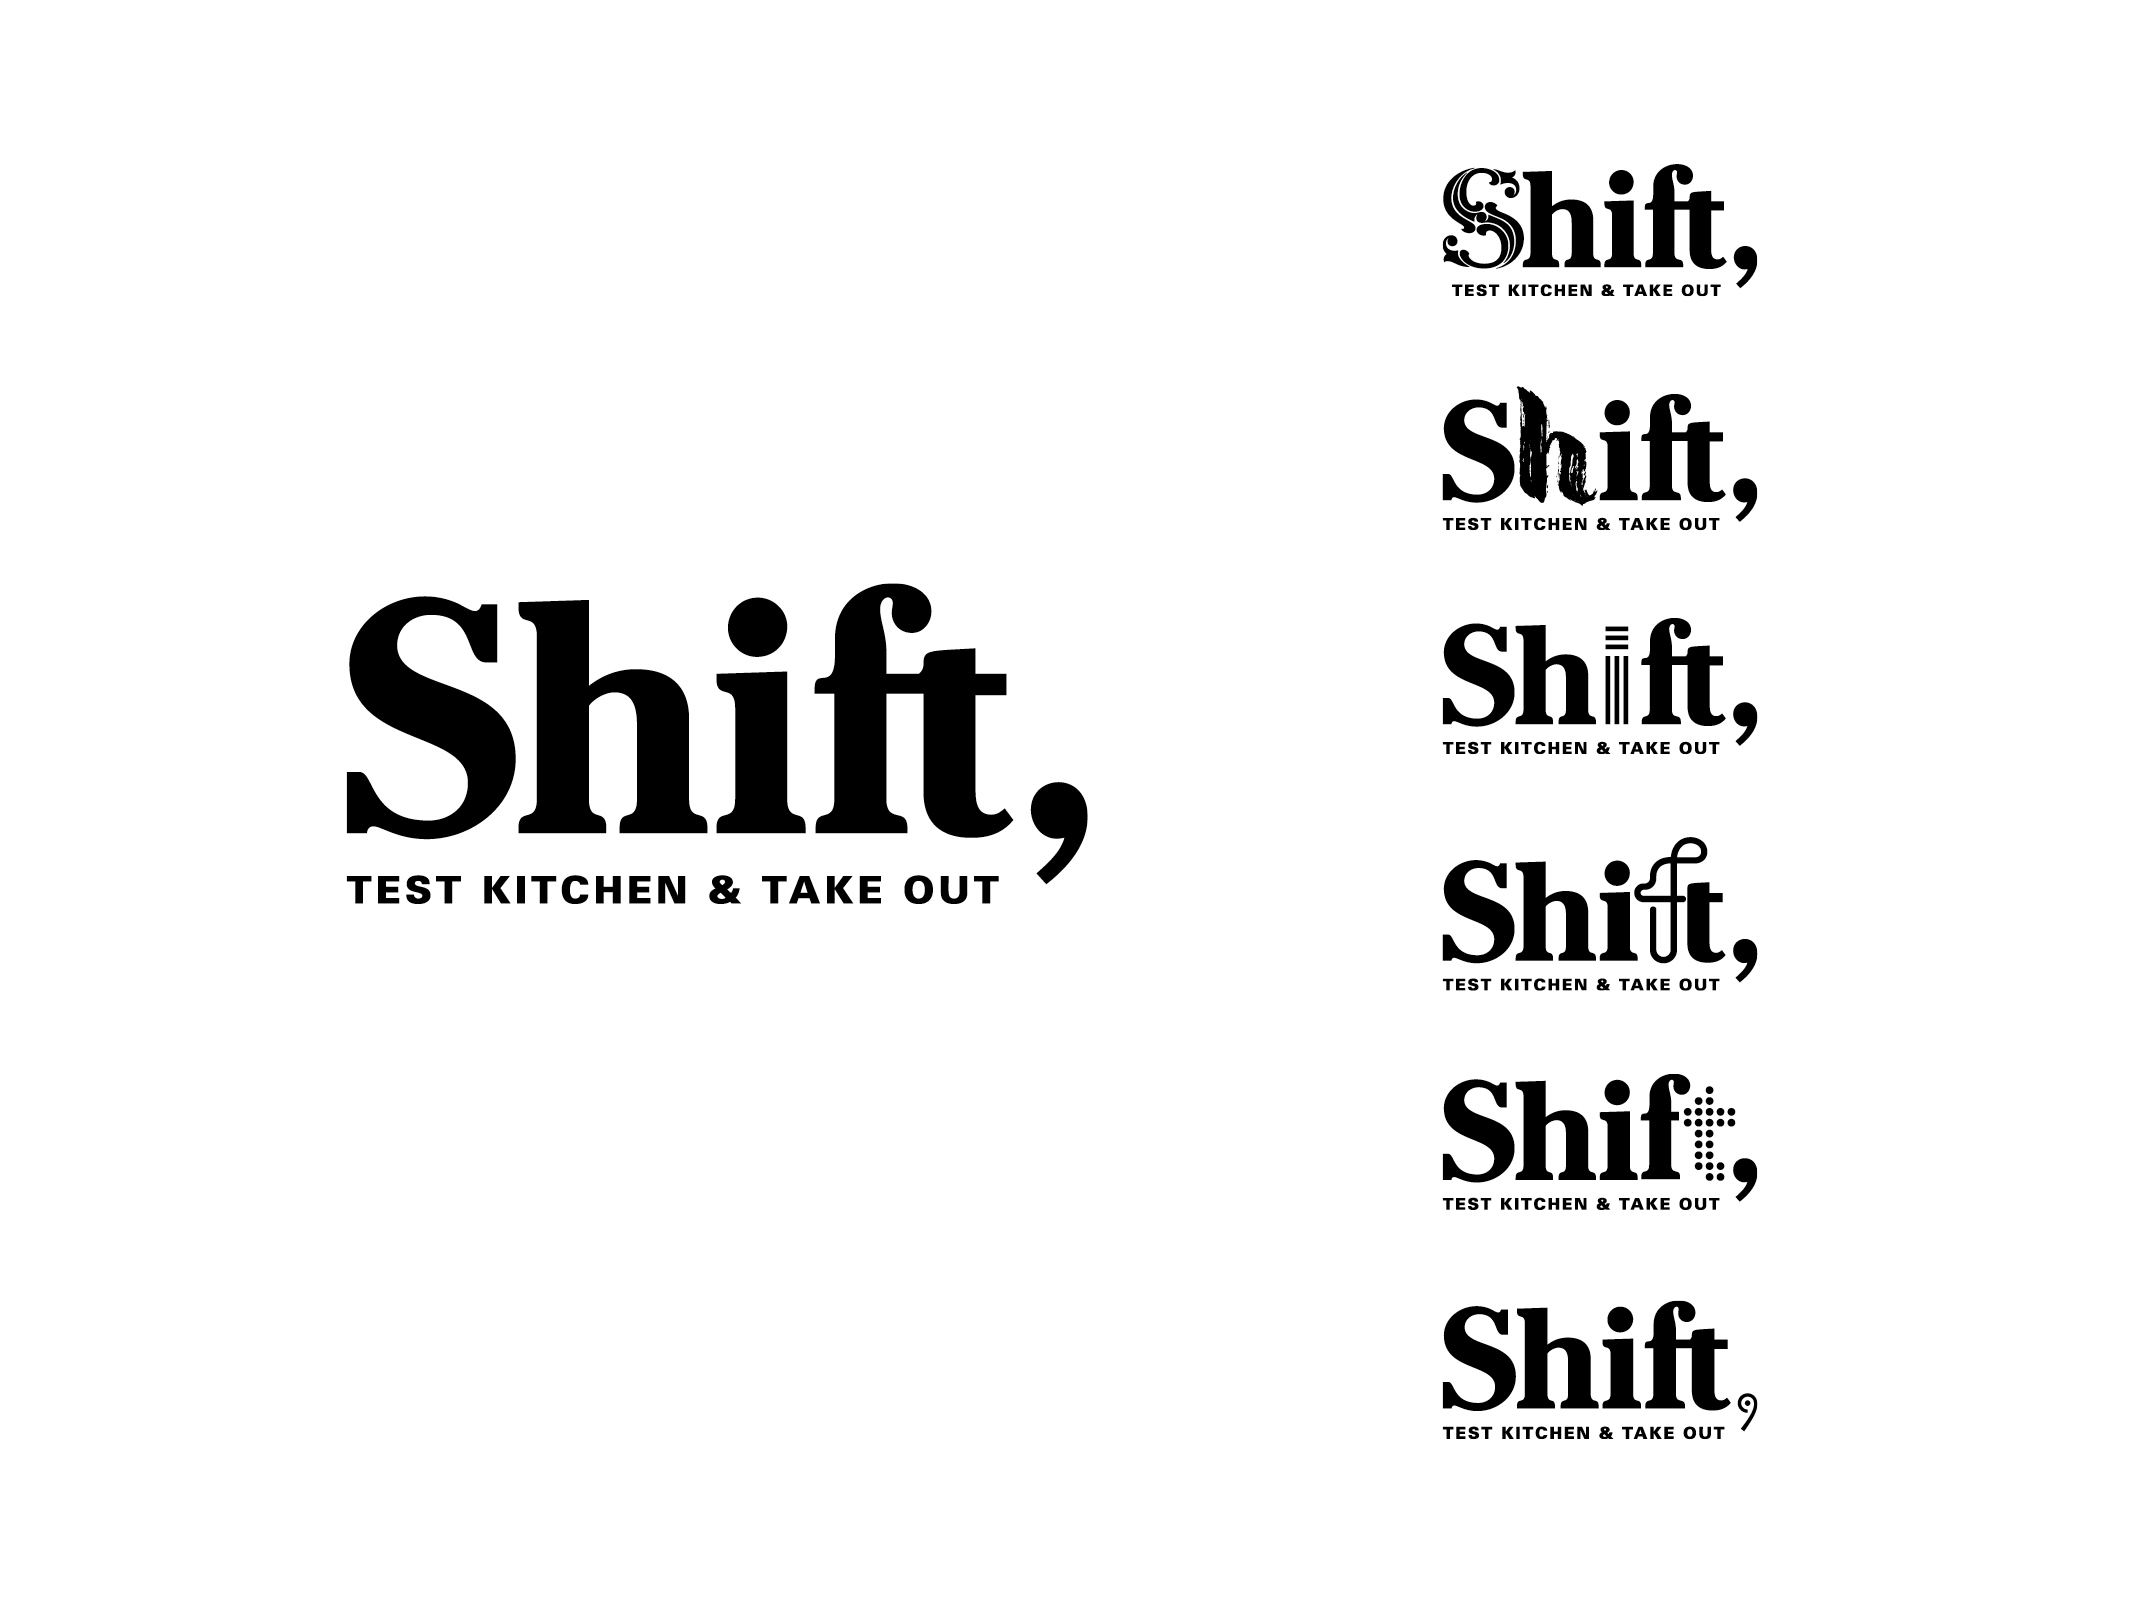 Shift Branding Featured in CA's Typography Annual